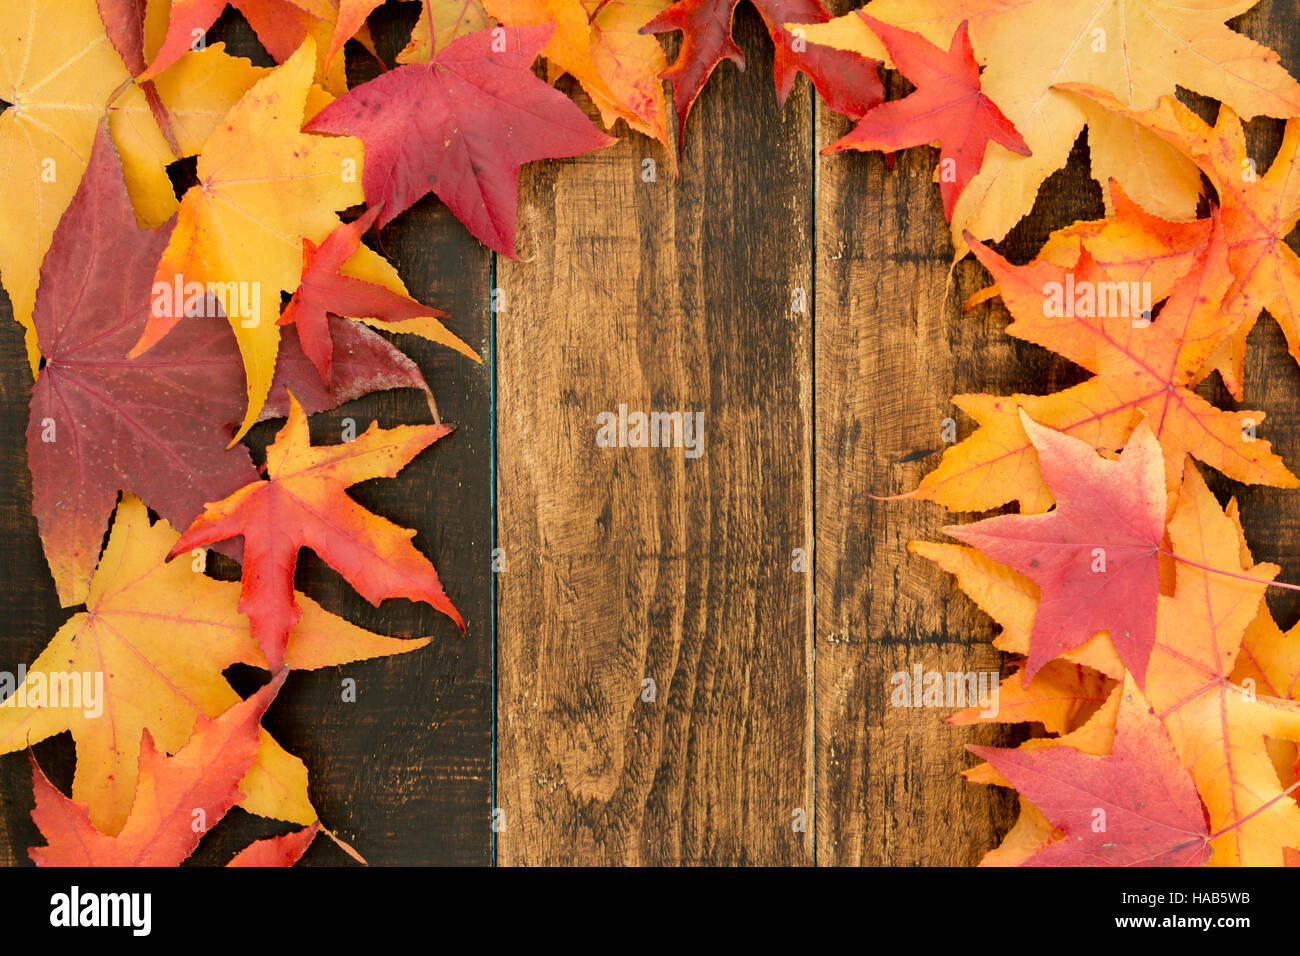 Beautiful leaves with many colors from the autumn Stock Photo